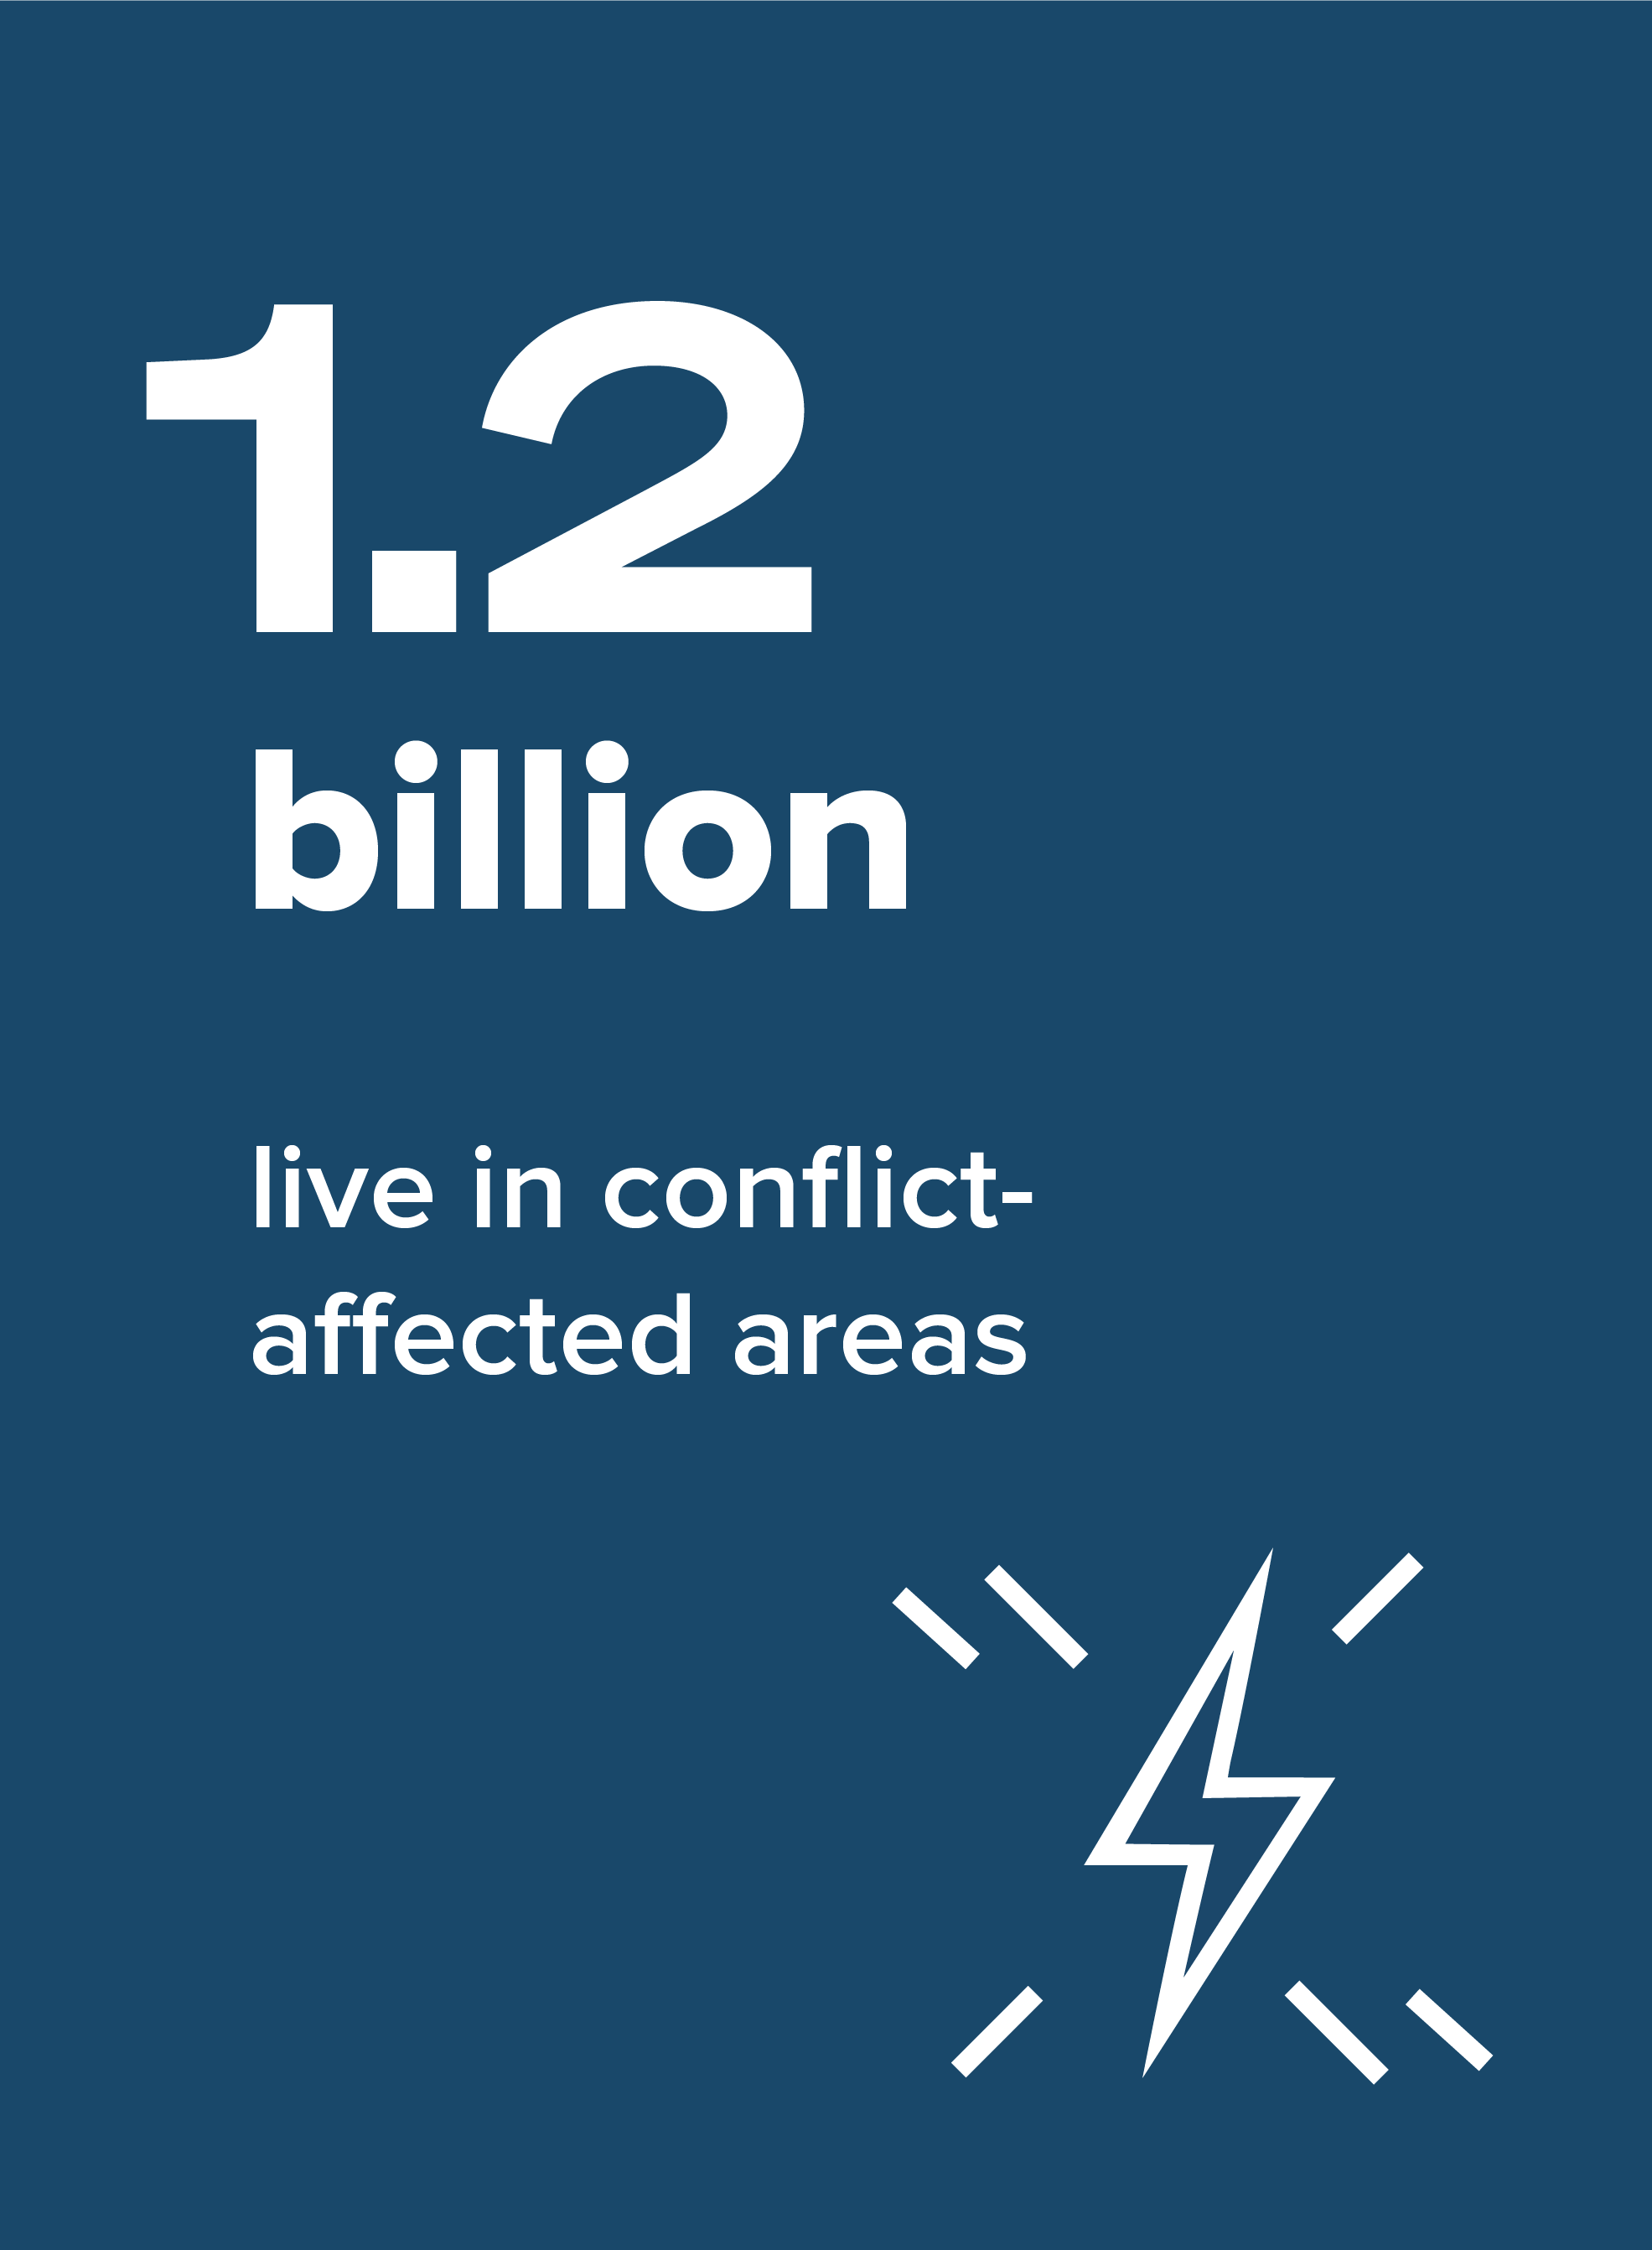 1.2 billion live in conflict-affected areas